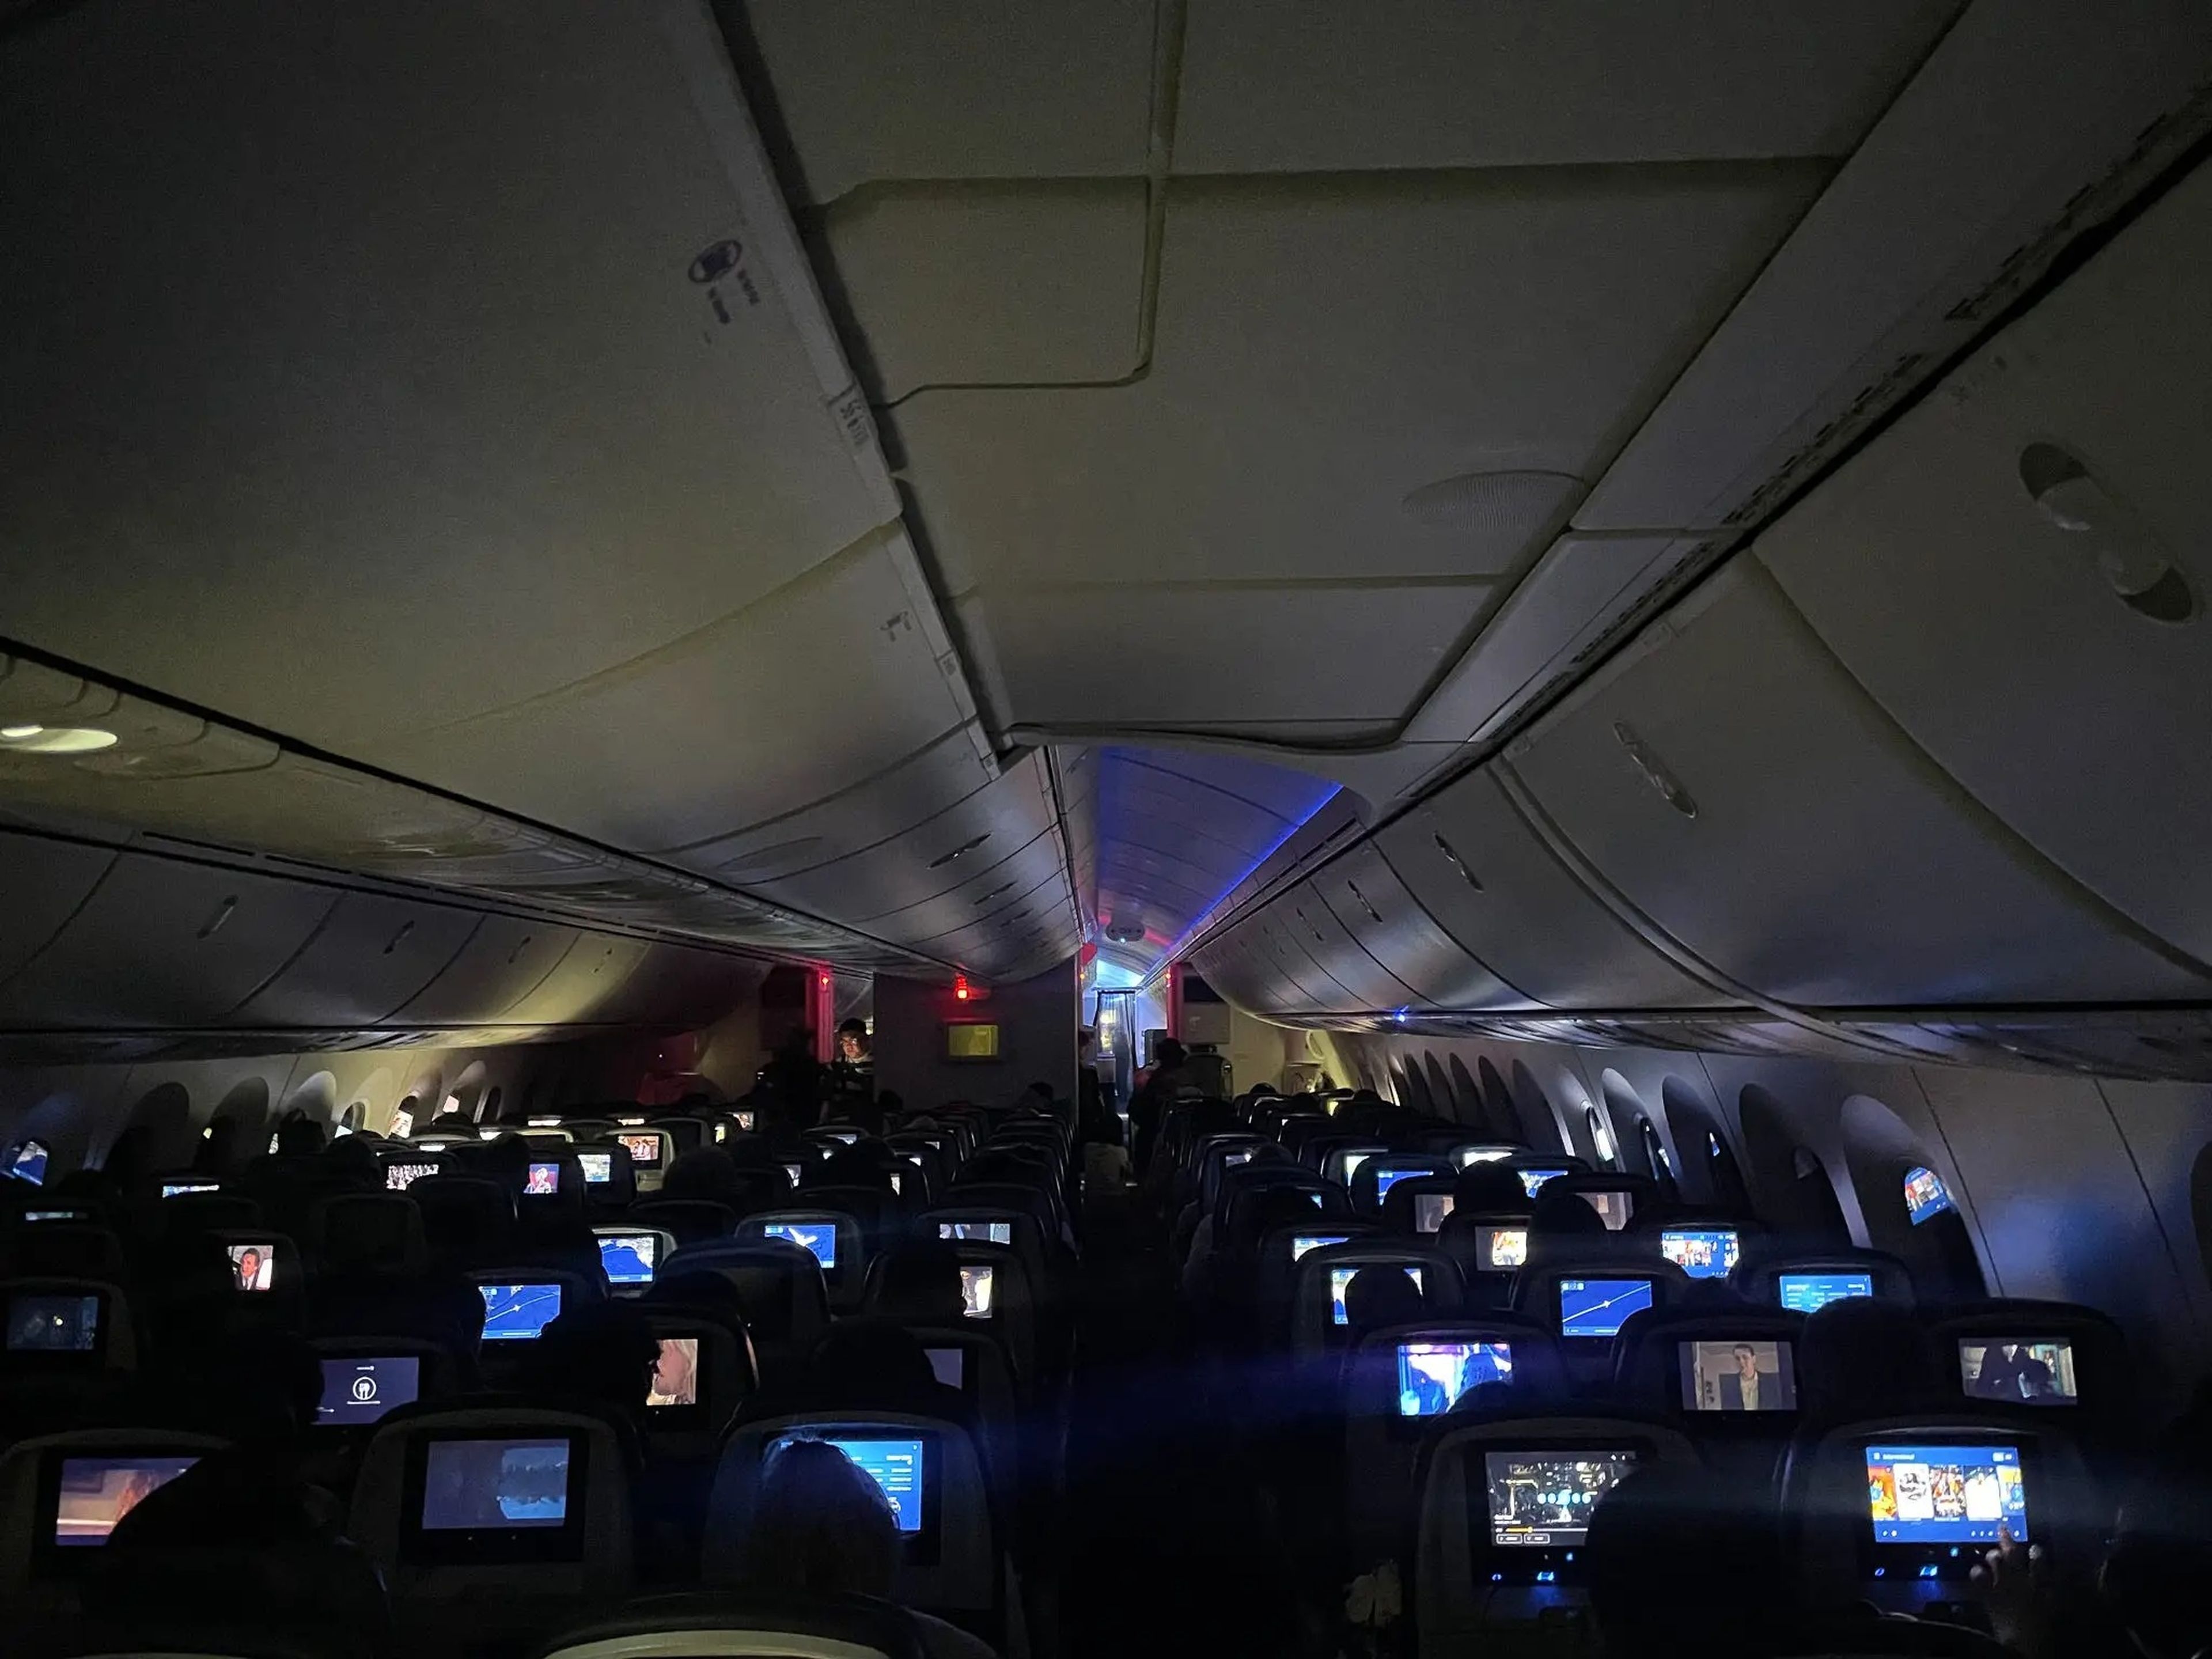 The interior of the plane's cabin with all the lights off.